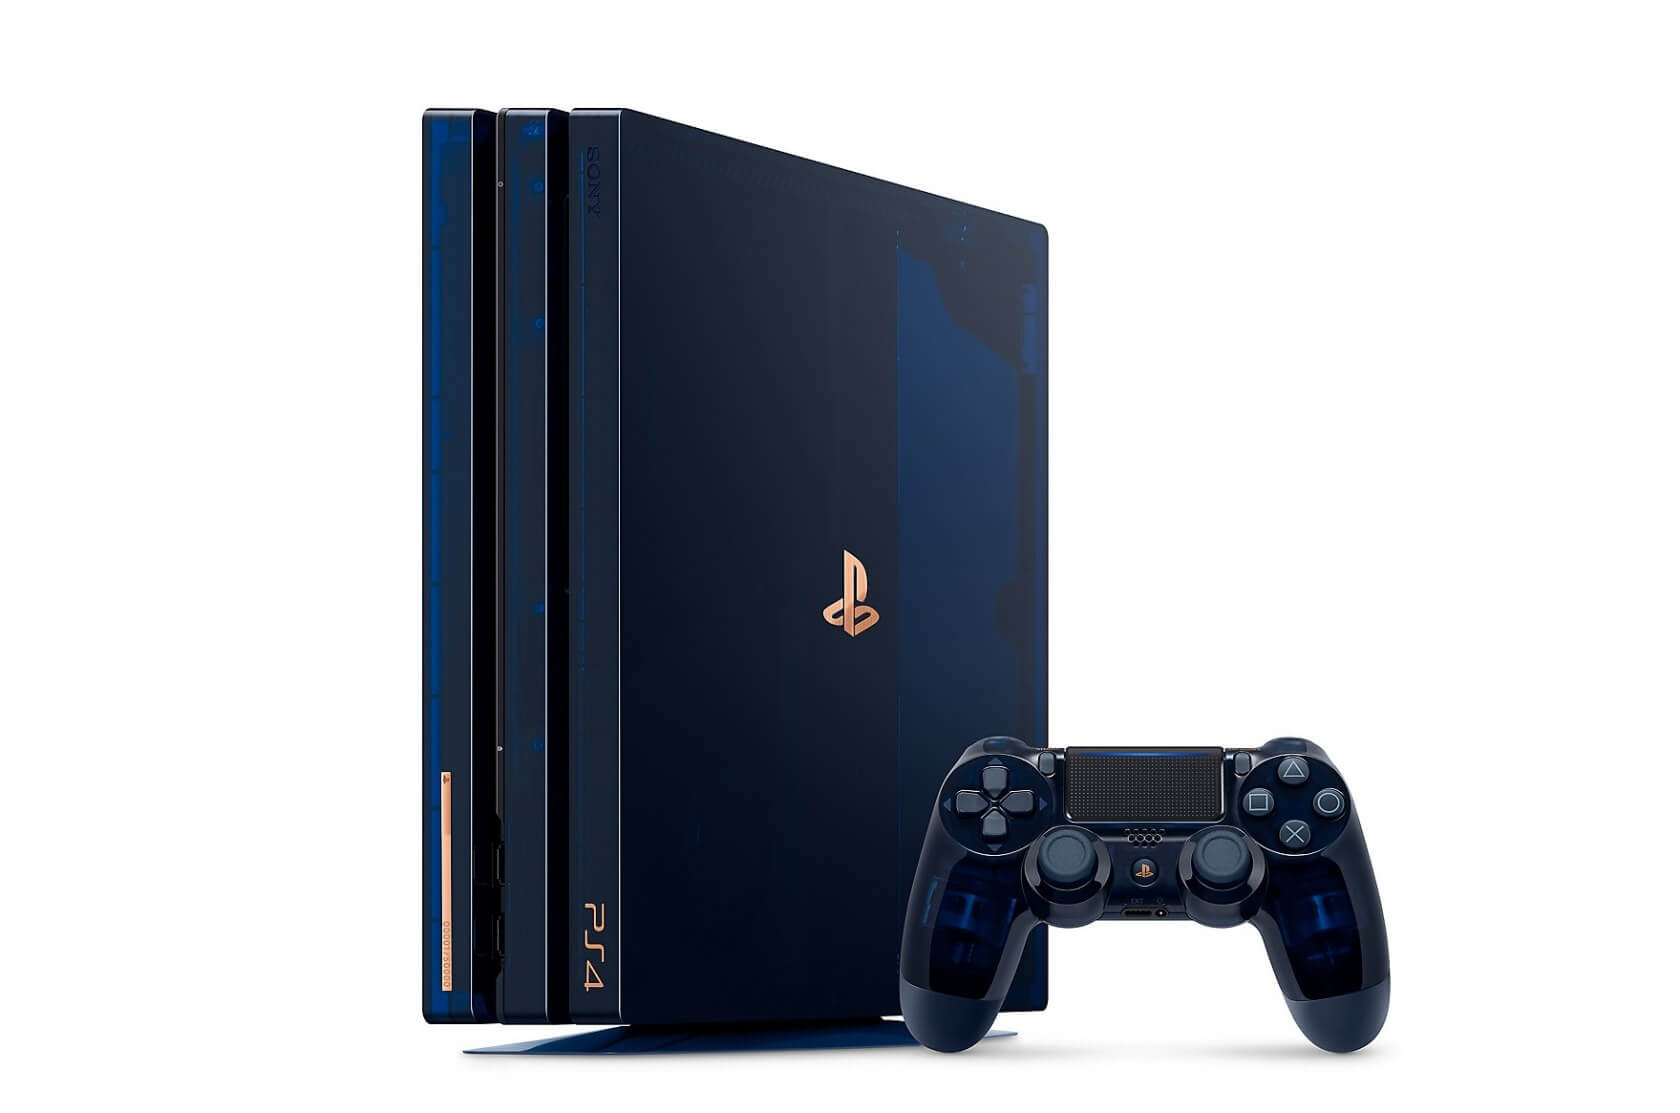 Sony releasing limited edition translucent PS4 Pro to celebrate 500 million unit sales